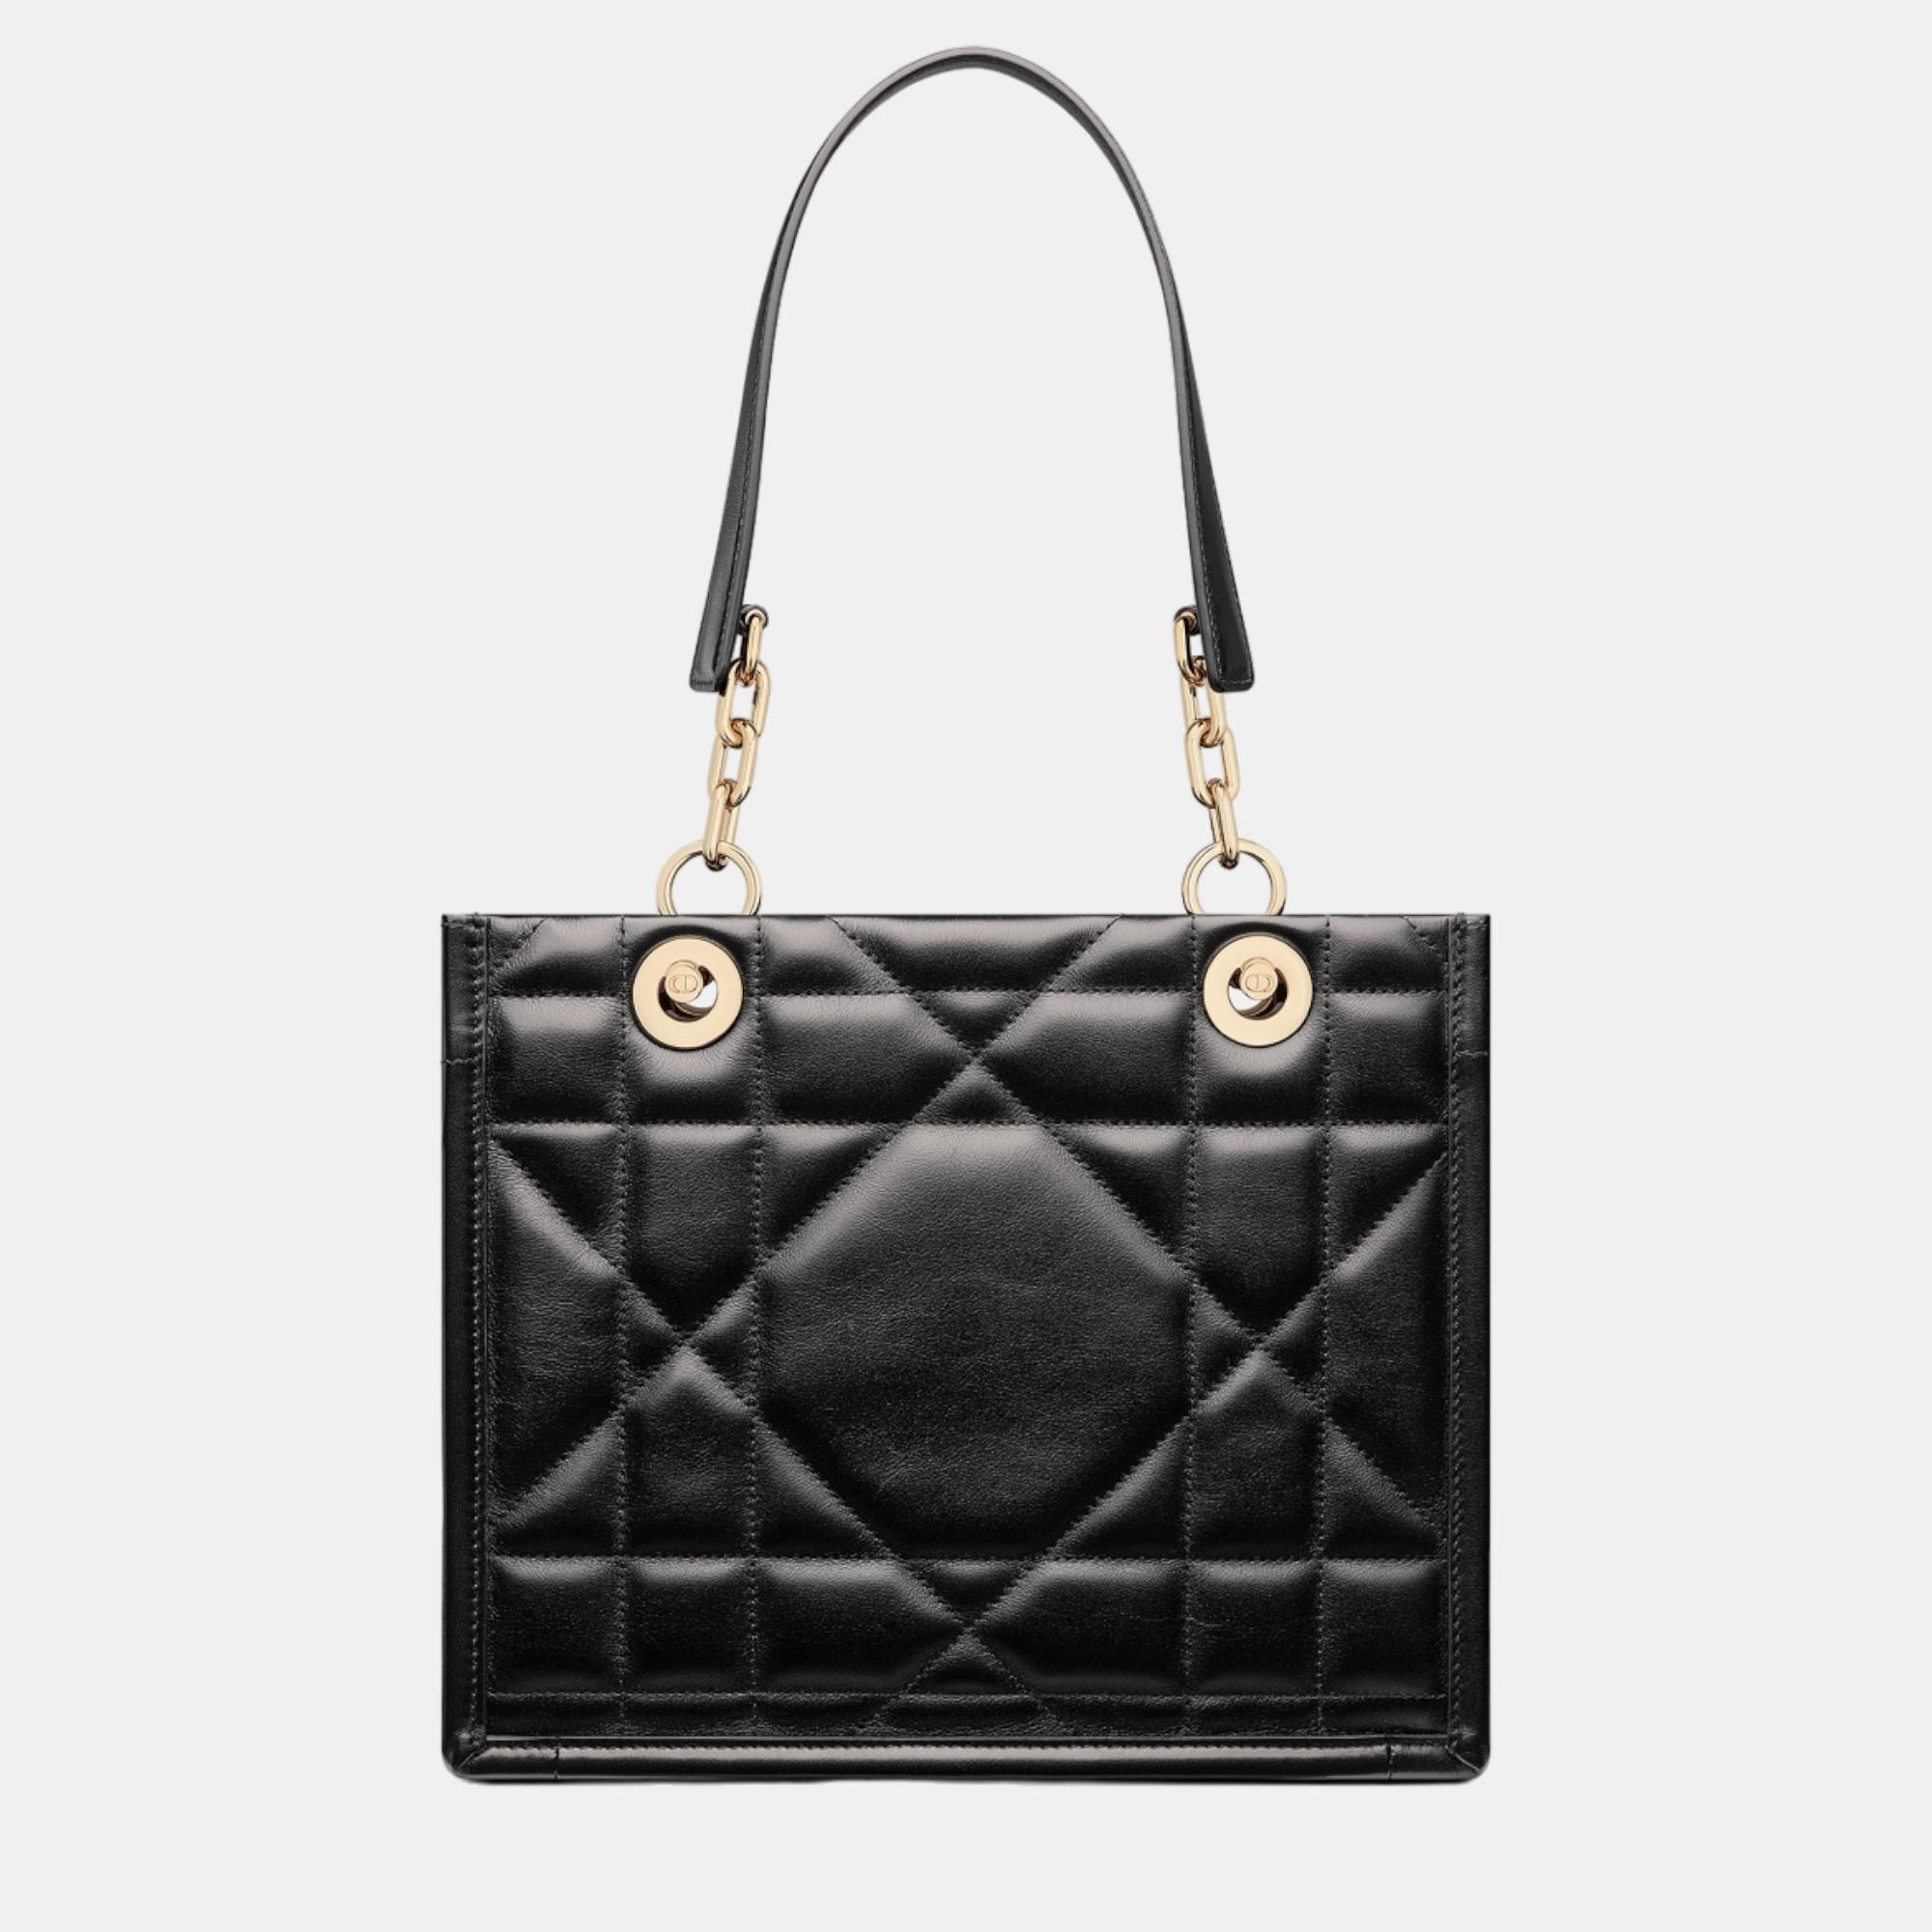 Carry this lovely Dior bag as a stylish accompaniment to your ensemble. Made from high quality materials it has a luxe look and durable quality.